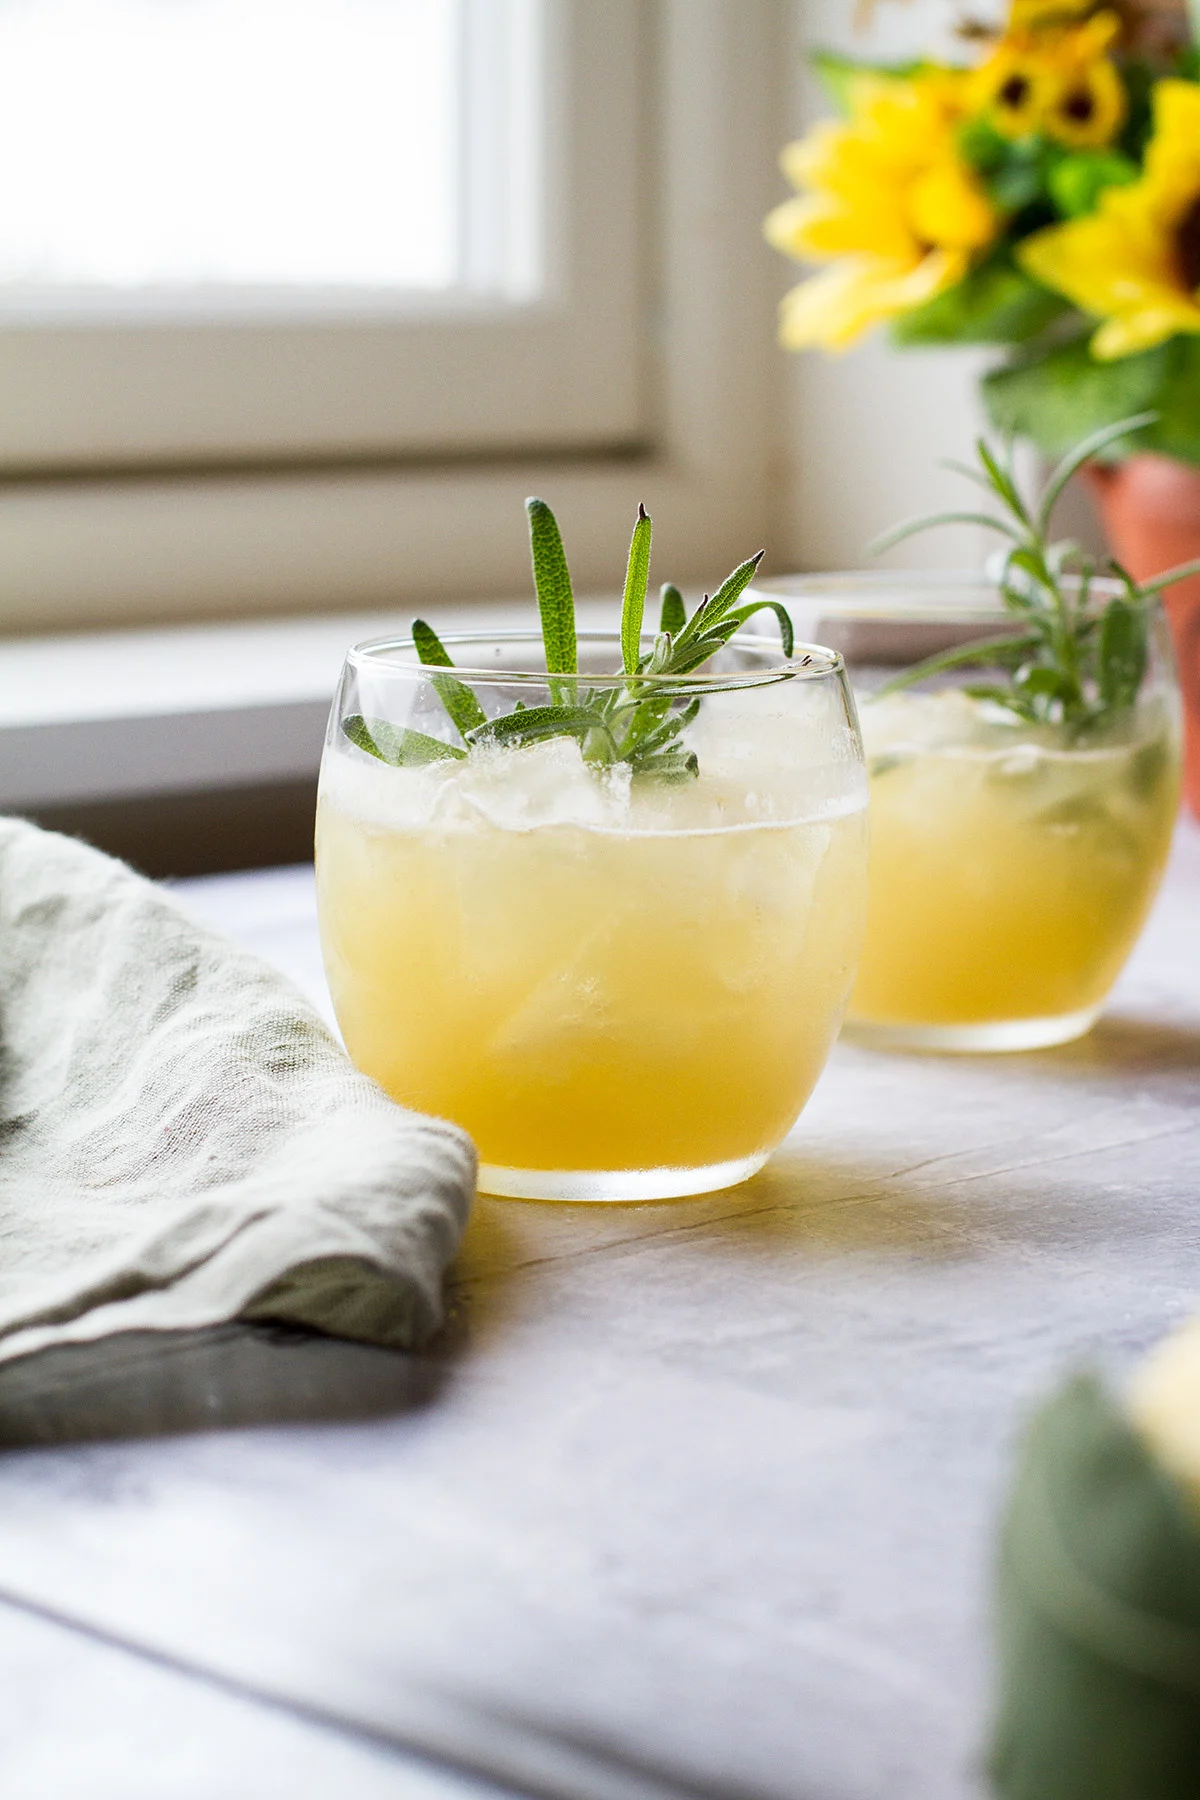 Two glasses filled with a whiskey drink and garnished with rosemary.